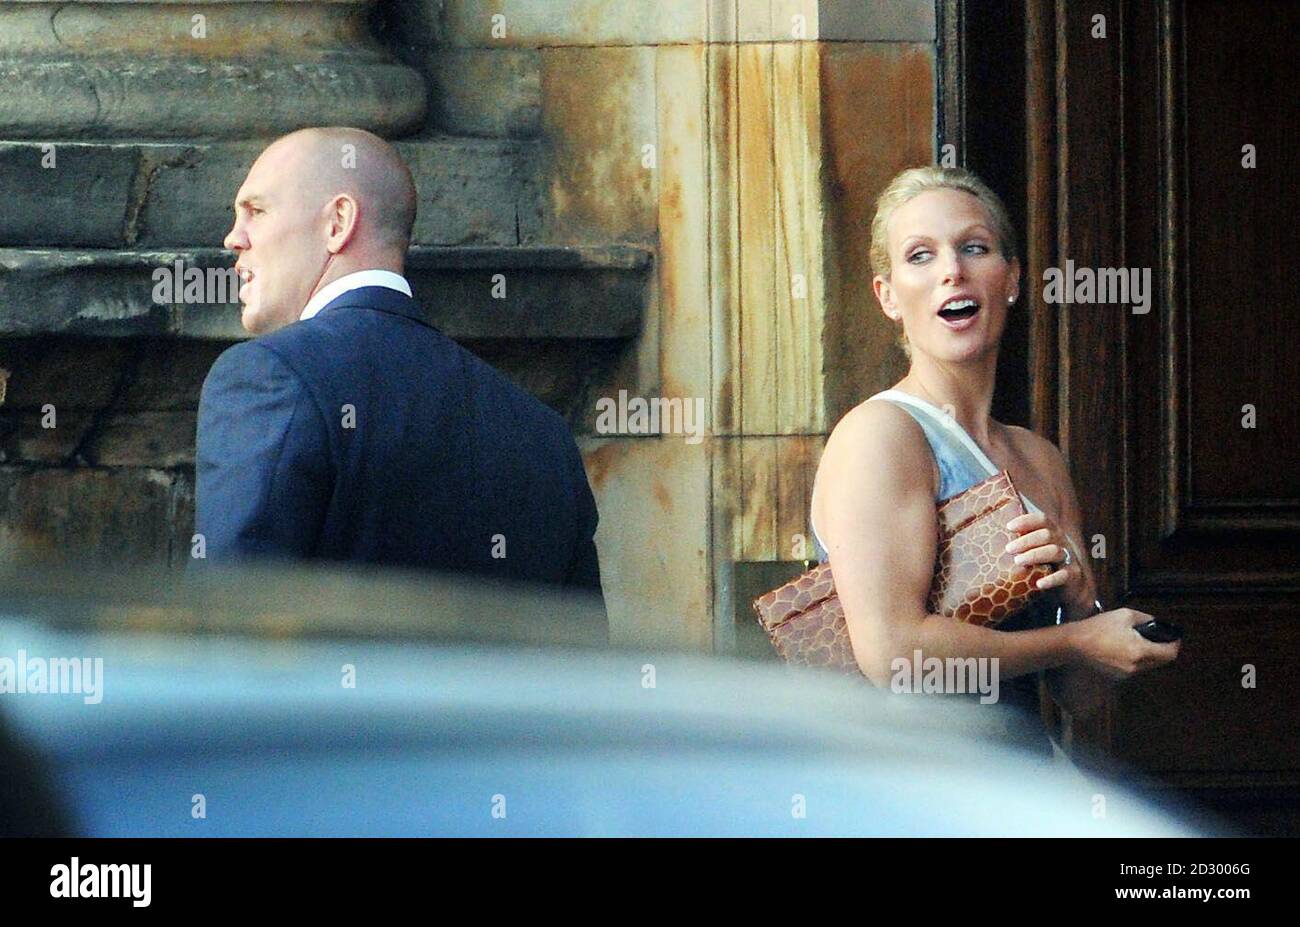 Zara Phillips and Mike Tindall arrive back at the Palace of Holyroodhouse in Edinburgh, Scotland, ahead of the ahead their wedding tomorrow. PRESS ASSOCIATION Photo. Picture date: Friday July 29, 2011. See PA story ROYAL Wedding. Photo credit should read: Tim Ireland/PA Wire Stock Photo